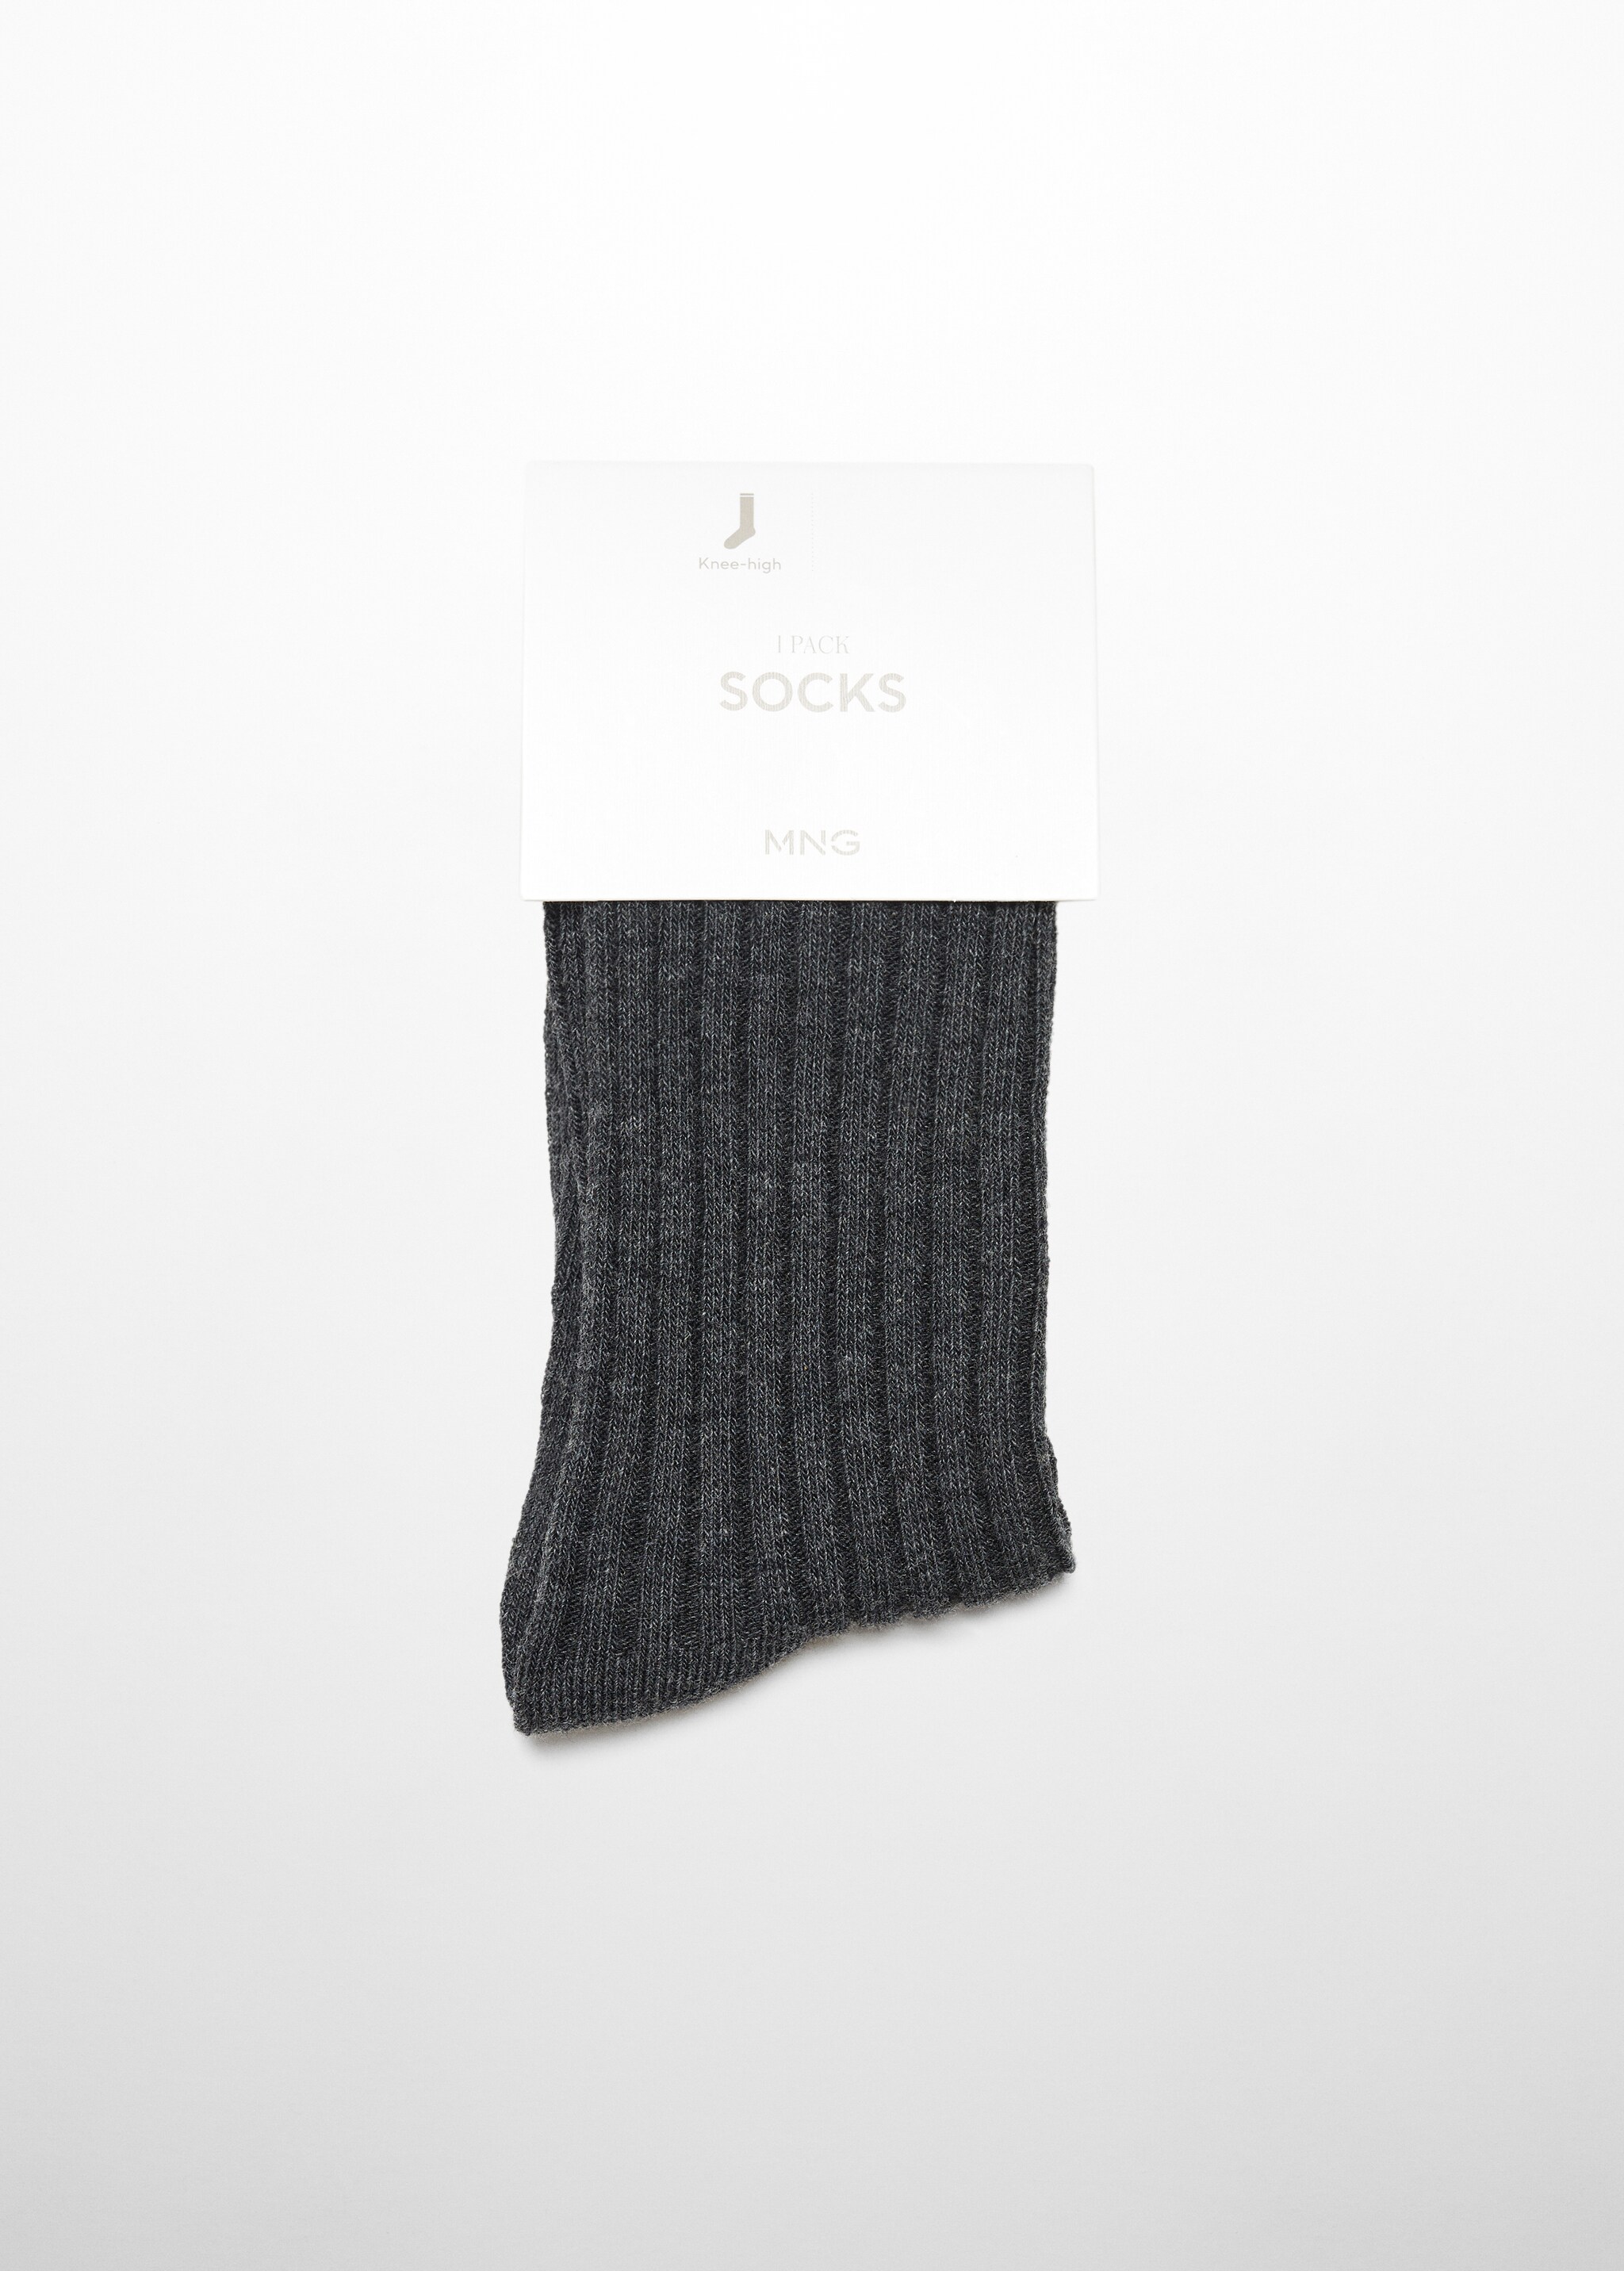 Knit socks - Article without model